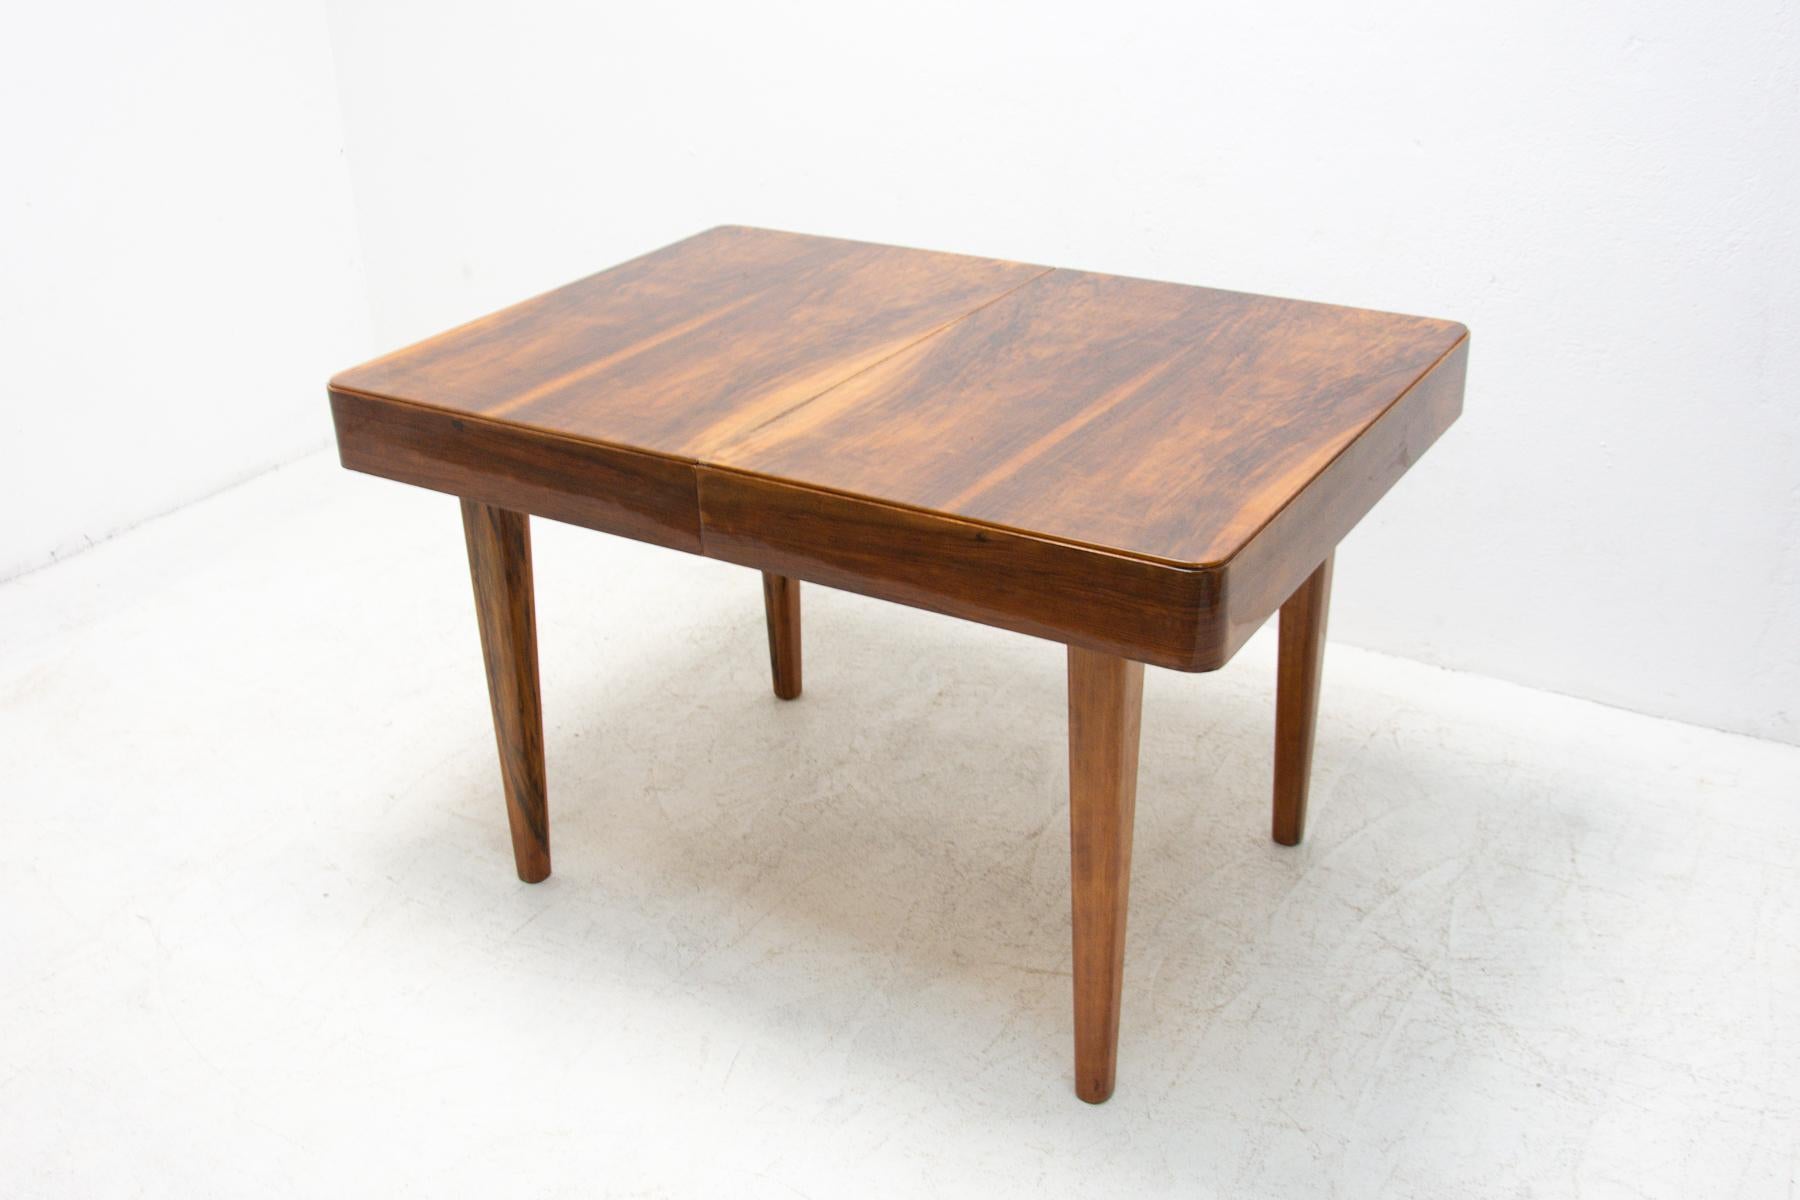 This adjustable dining table was made in the 1950s in the former Czechoslovakia. It was designed by Jindrich Halabala for ÚP Závody Brno. The material is a combination of solid wood and walnut veneer. The table is in excellent condition, fully